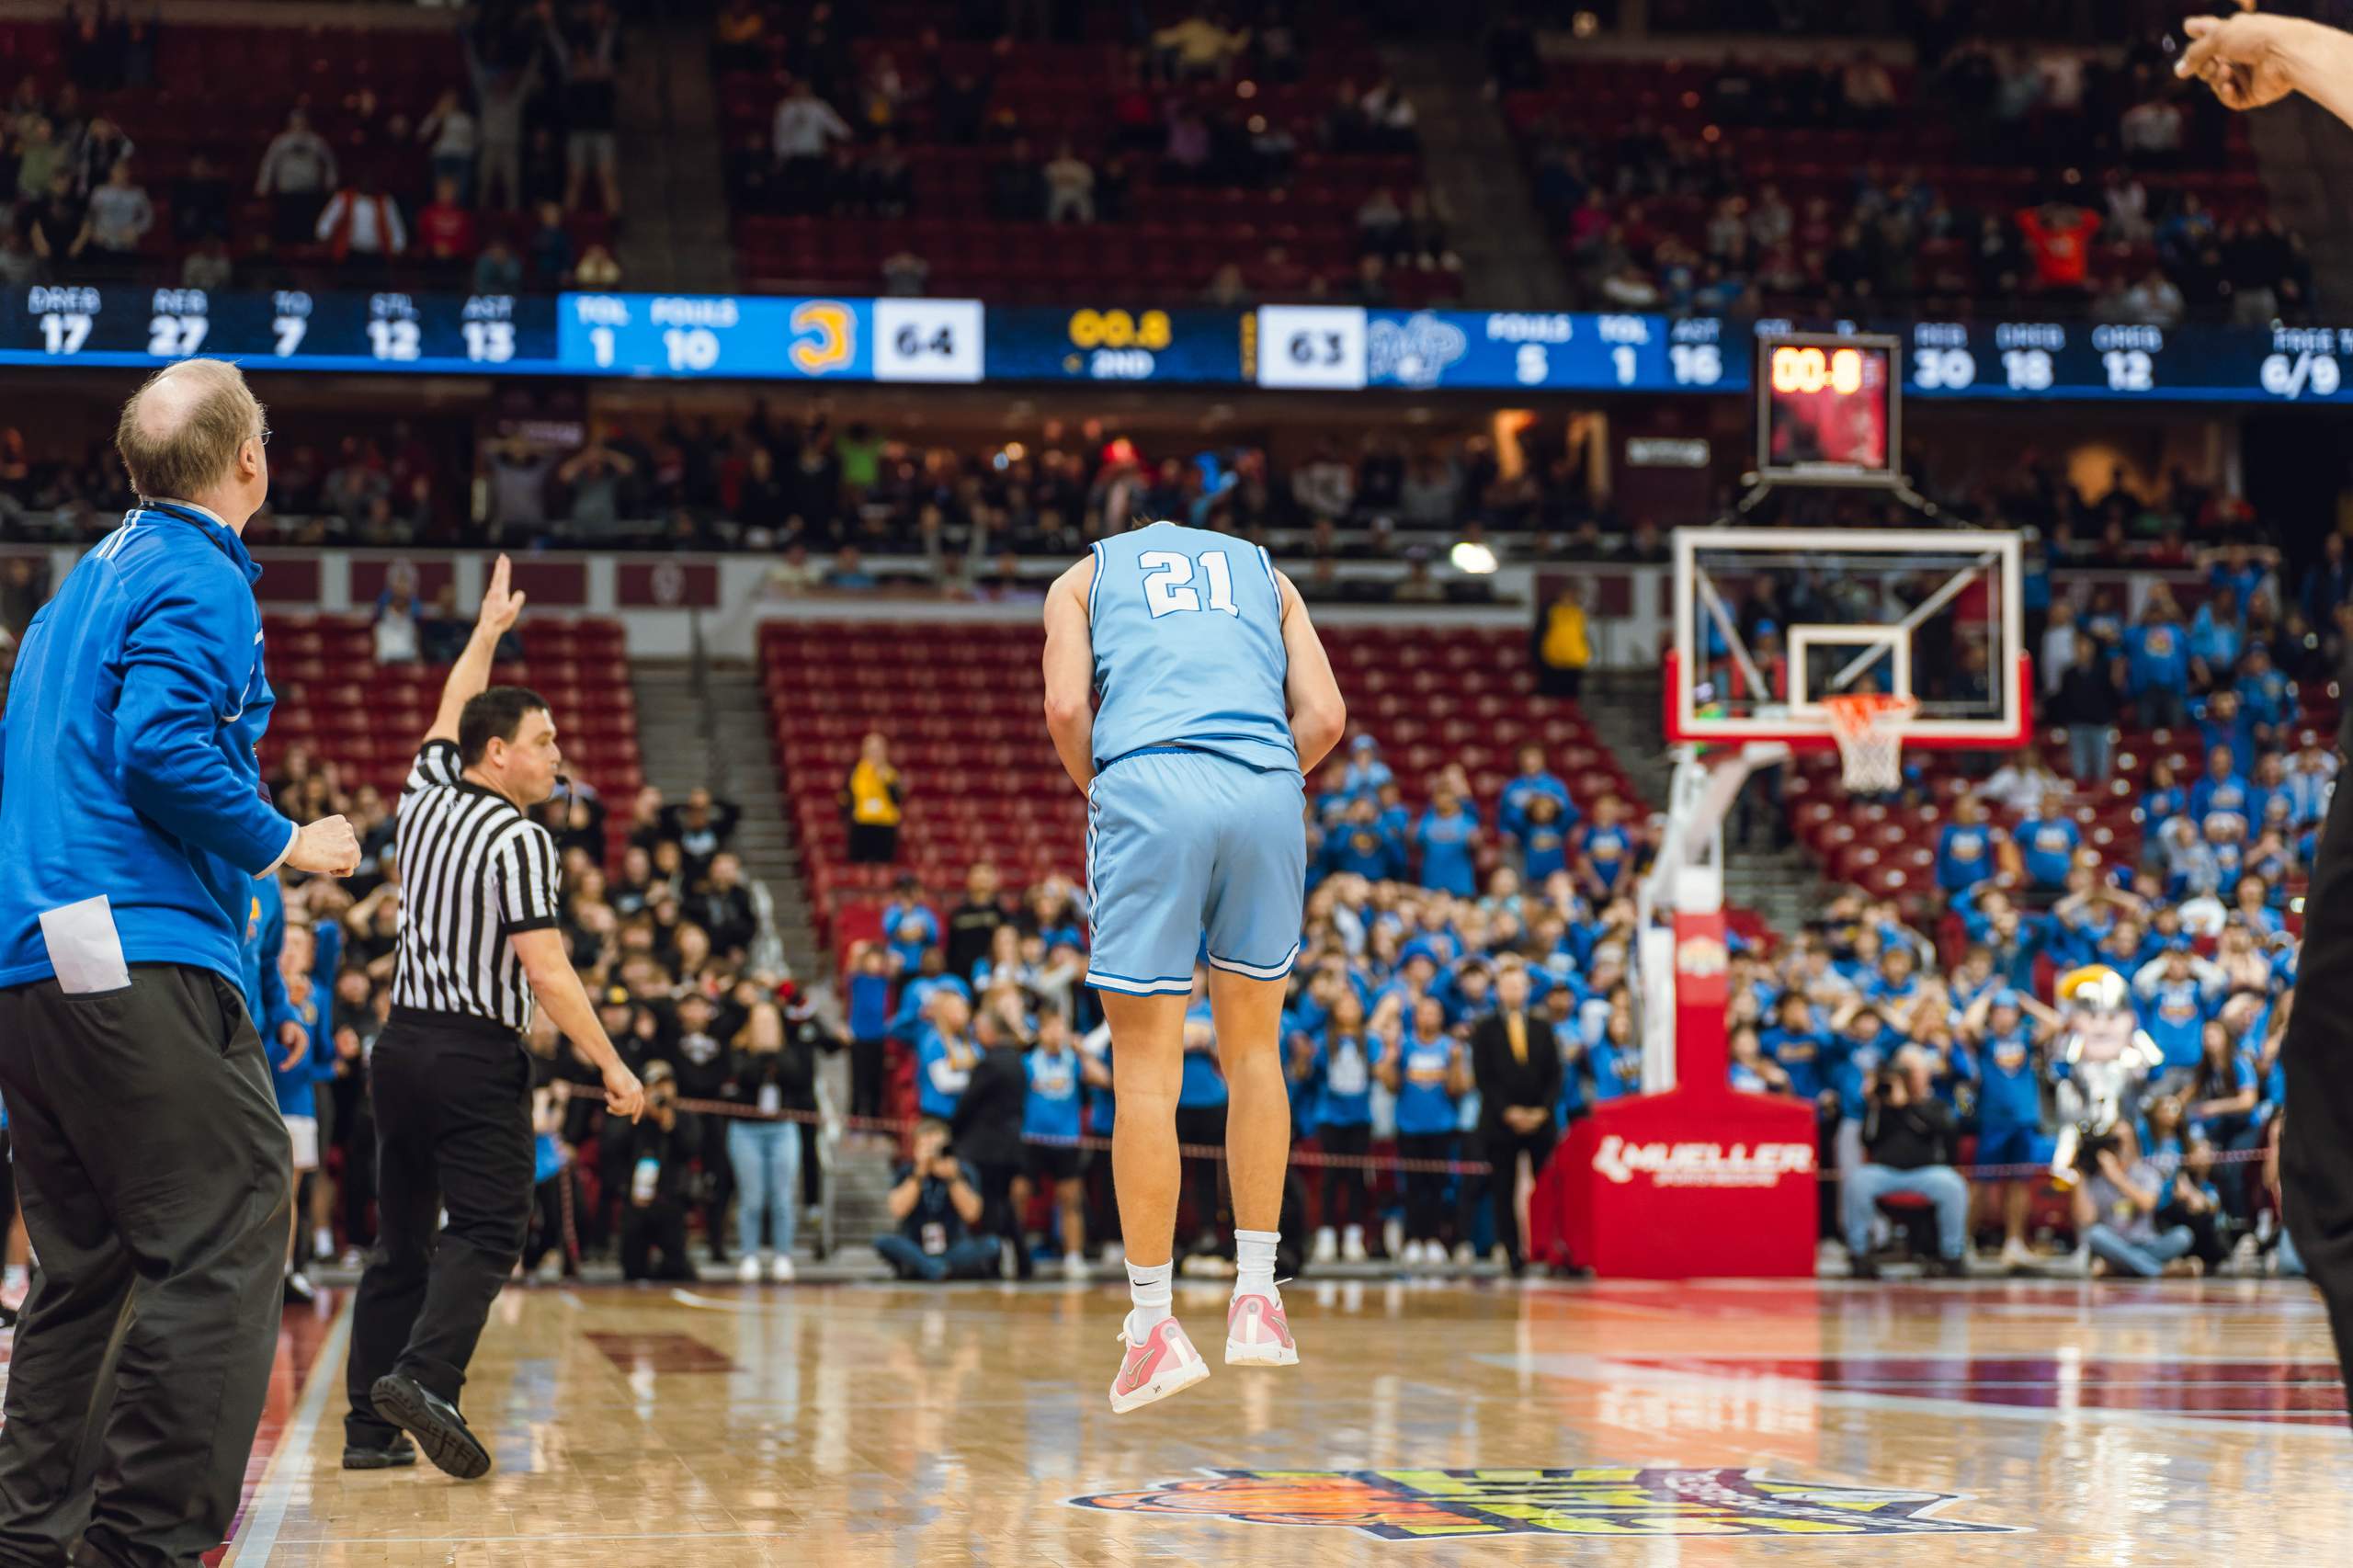 WIAA Boys Division 4 Championship Game between Mineral Point and Kenosha St. Joseph Catholic, photography by Ross Harried for Second Crop Sports